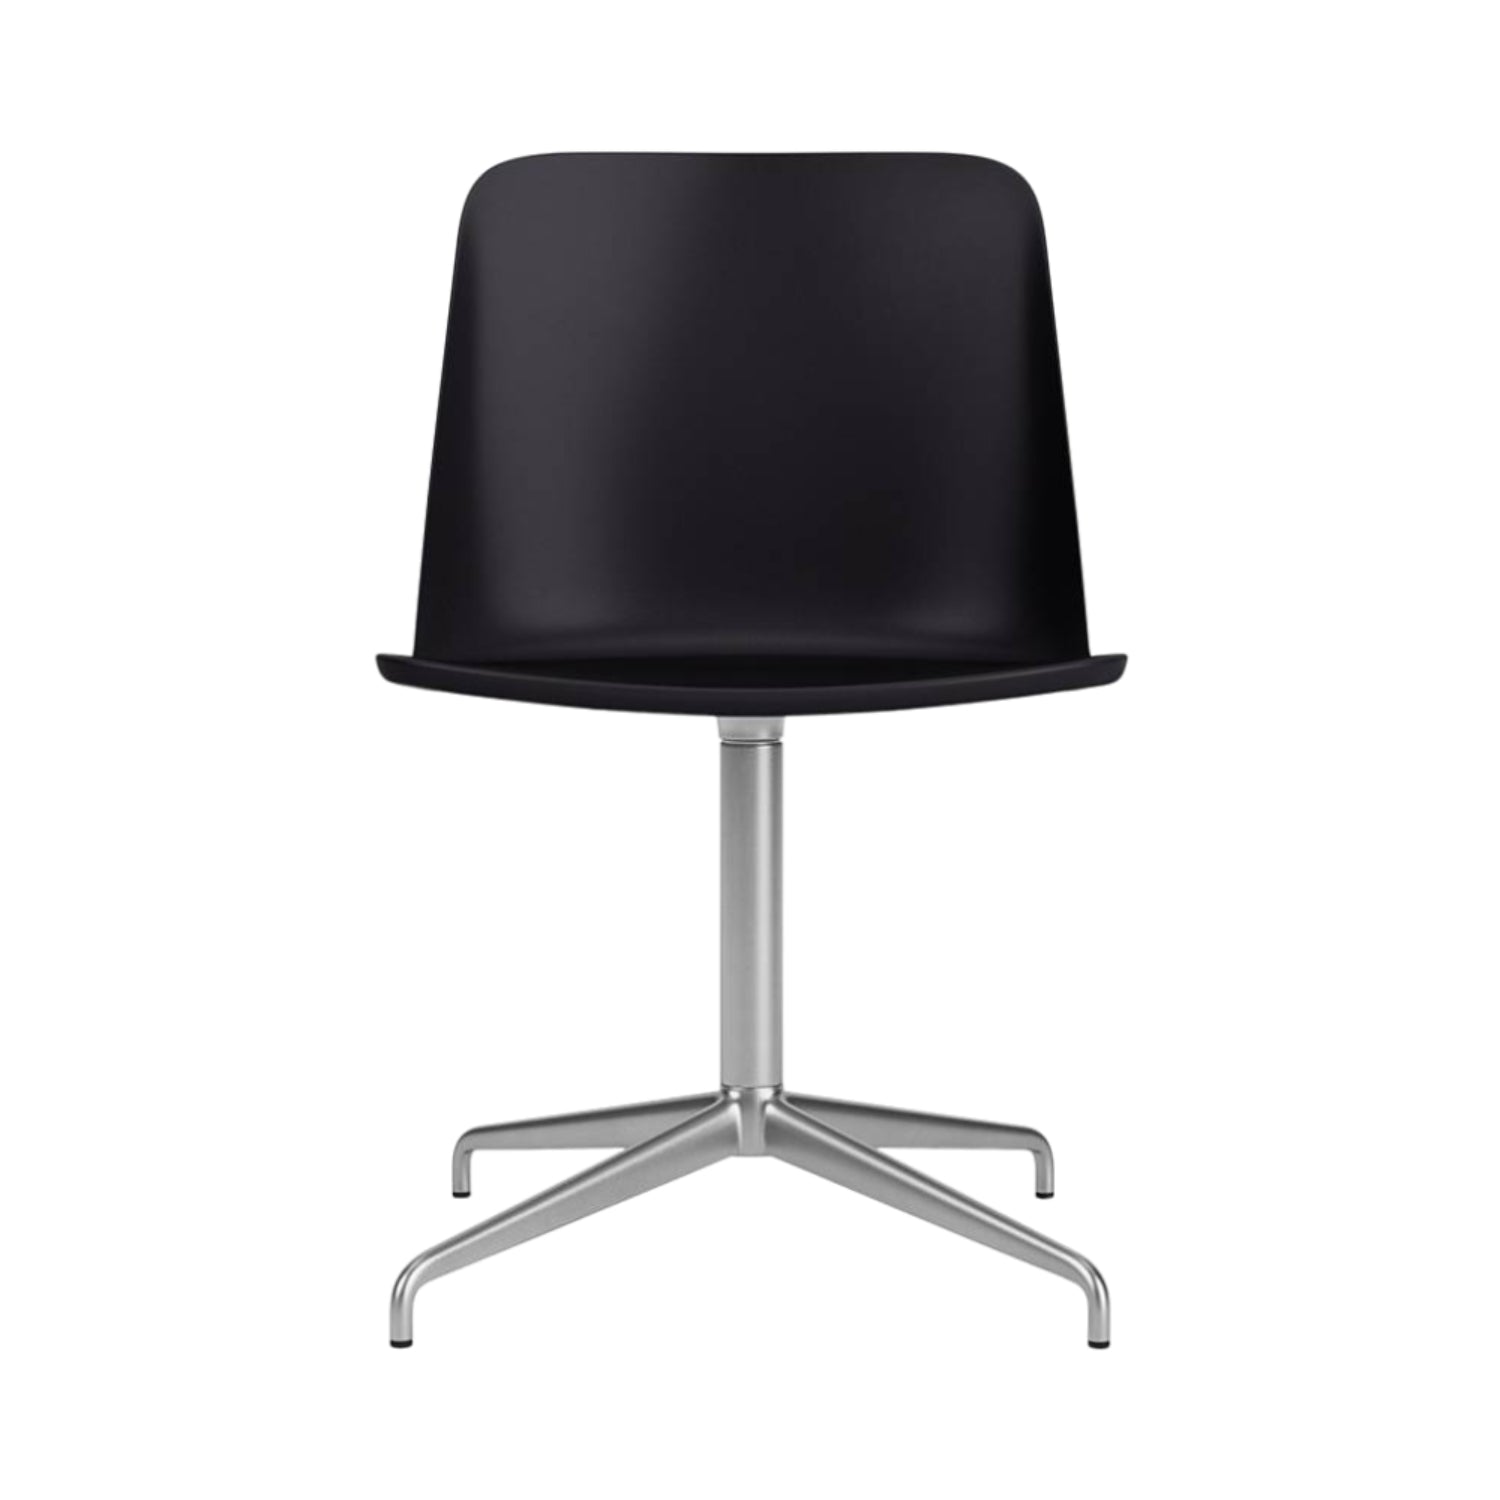 Rely Chair HW11: Black + Polished Aluminum